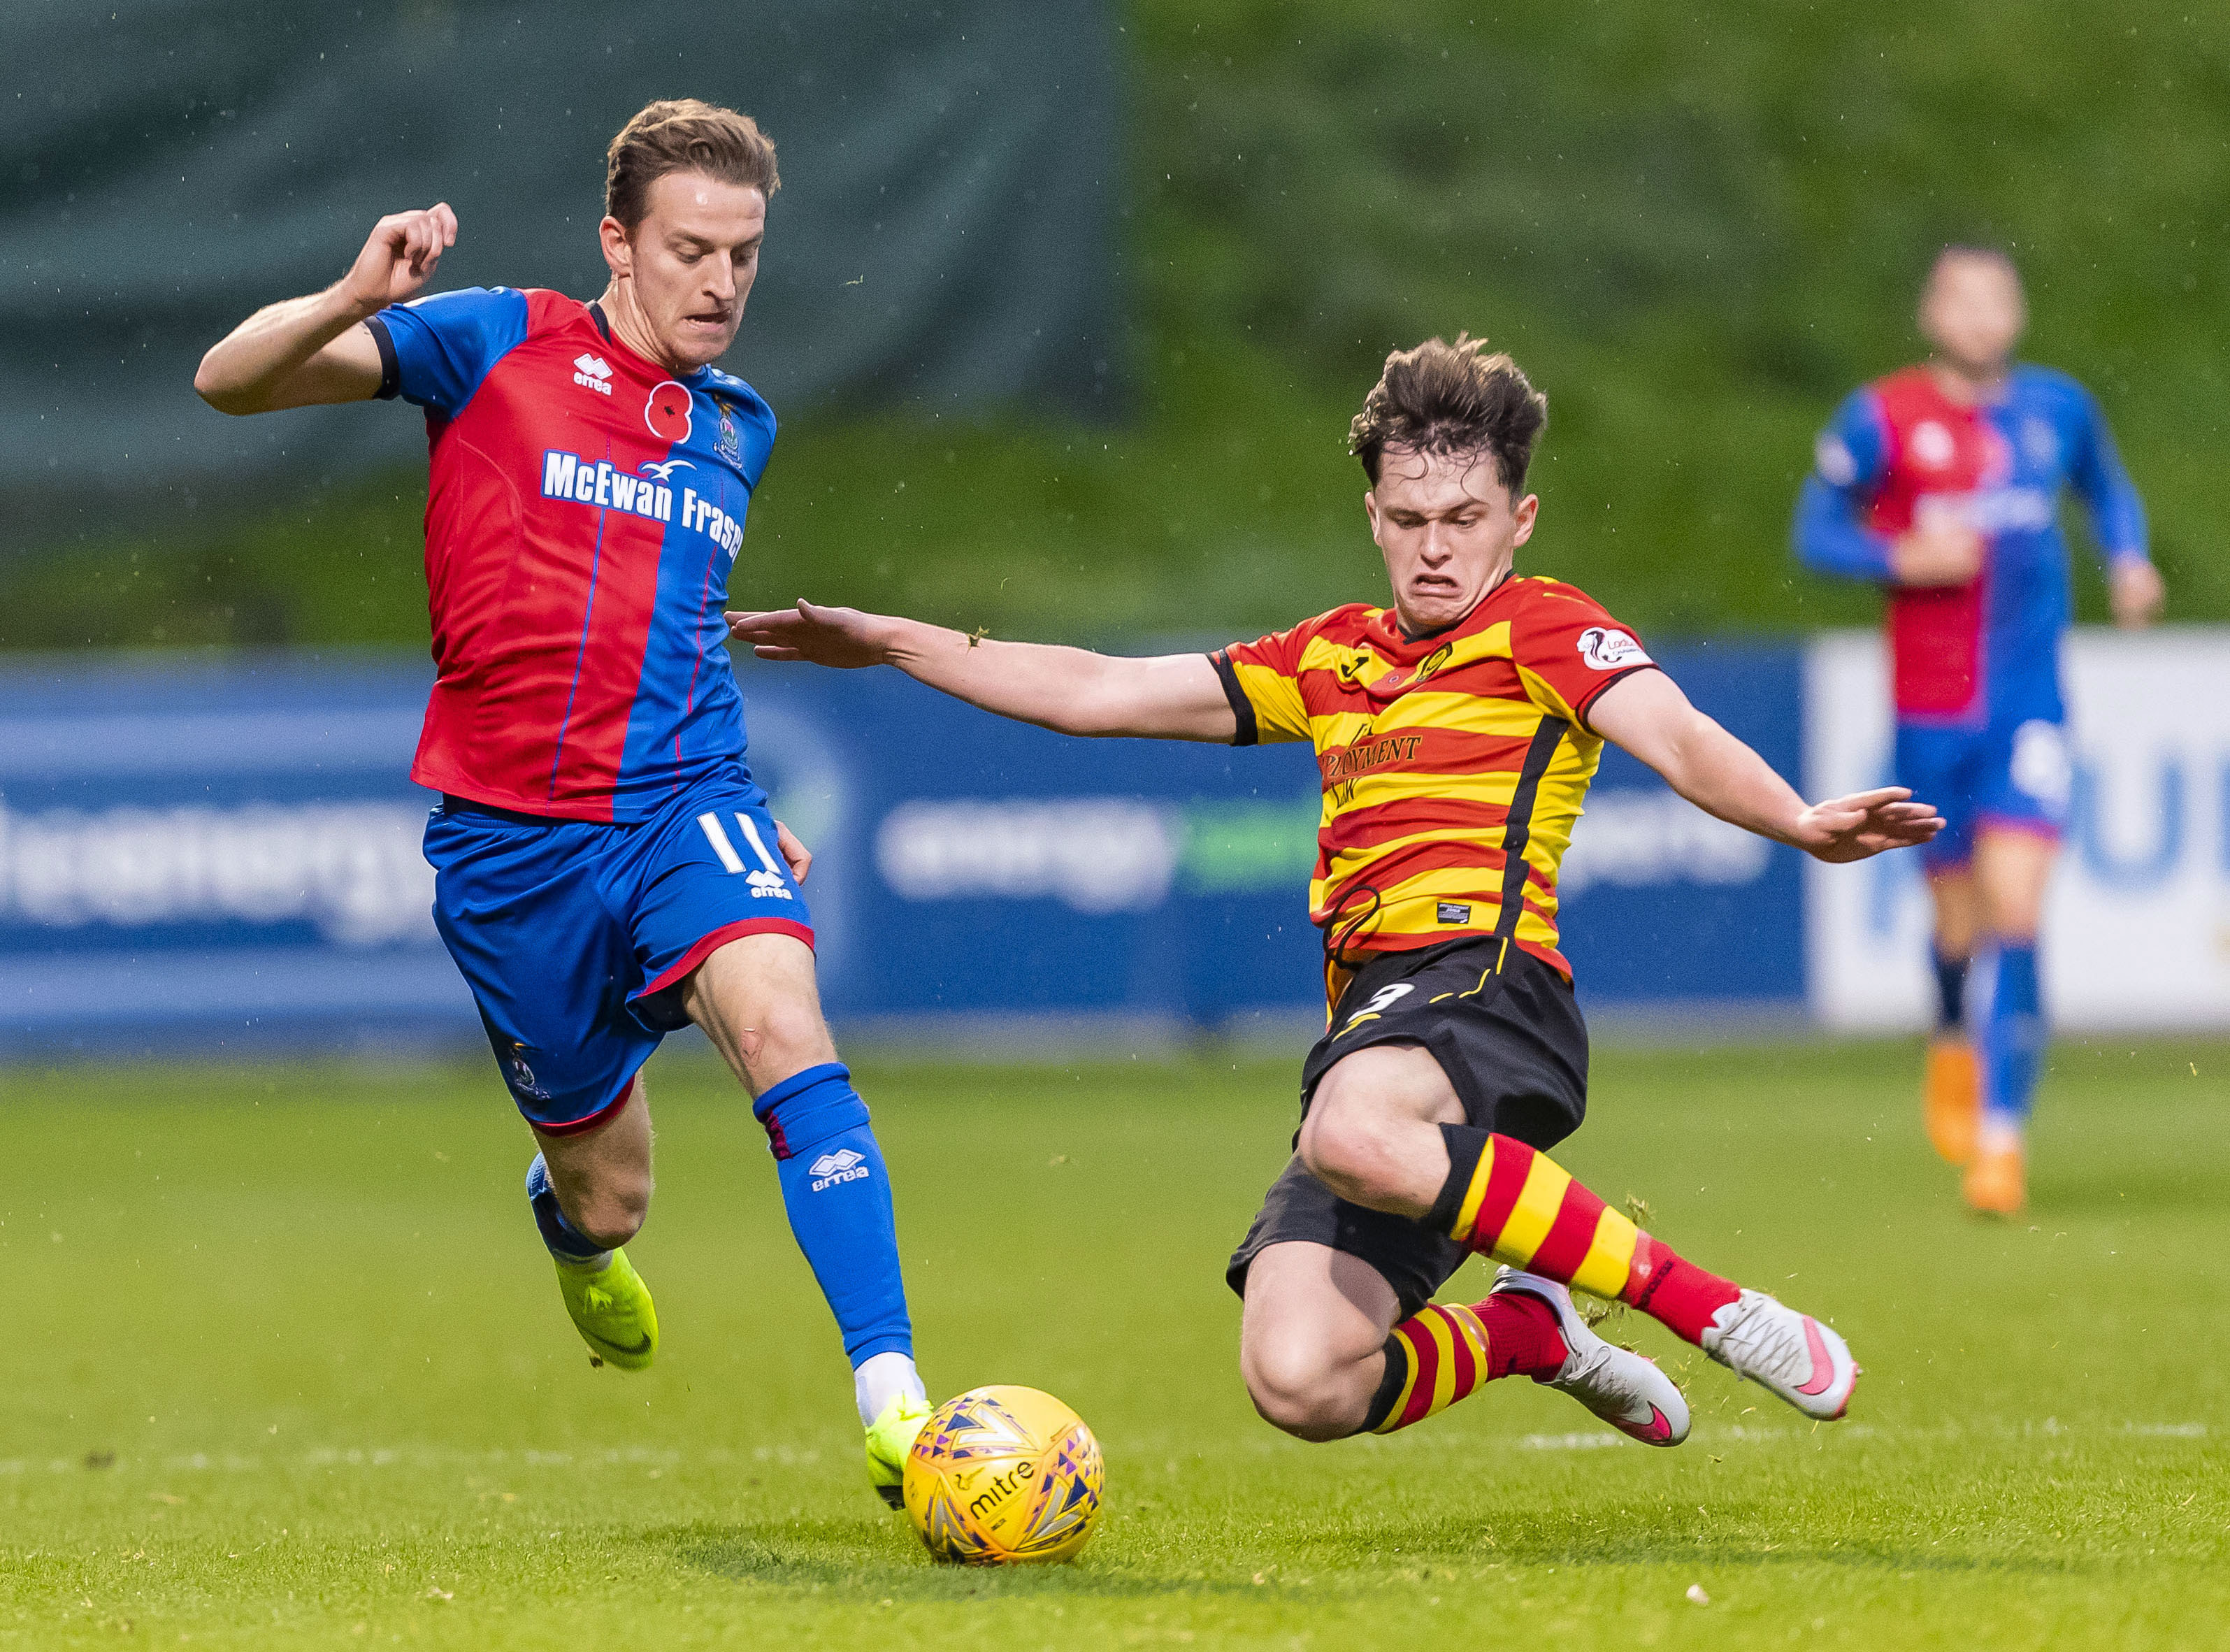 10/11/18 LADBROKES CHAMPIONSHIP
PARTICK THISTLE v INVERNESS CT
THE ENERGY CHECK STADIUM AT FIRHILL - GLASGOW
Inverness CT's Tom Walsh (L) in action with Partick Thistle's James Penrice.